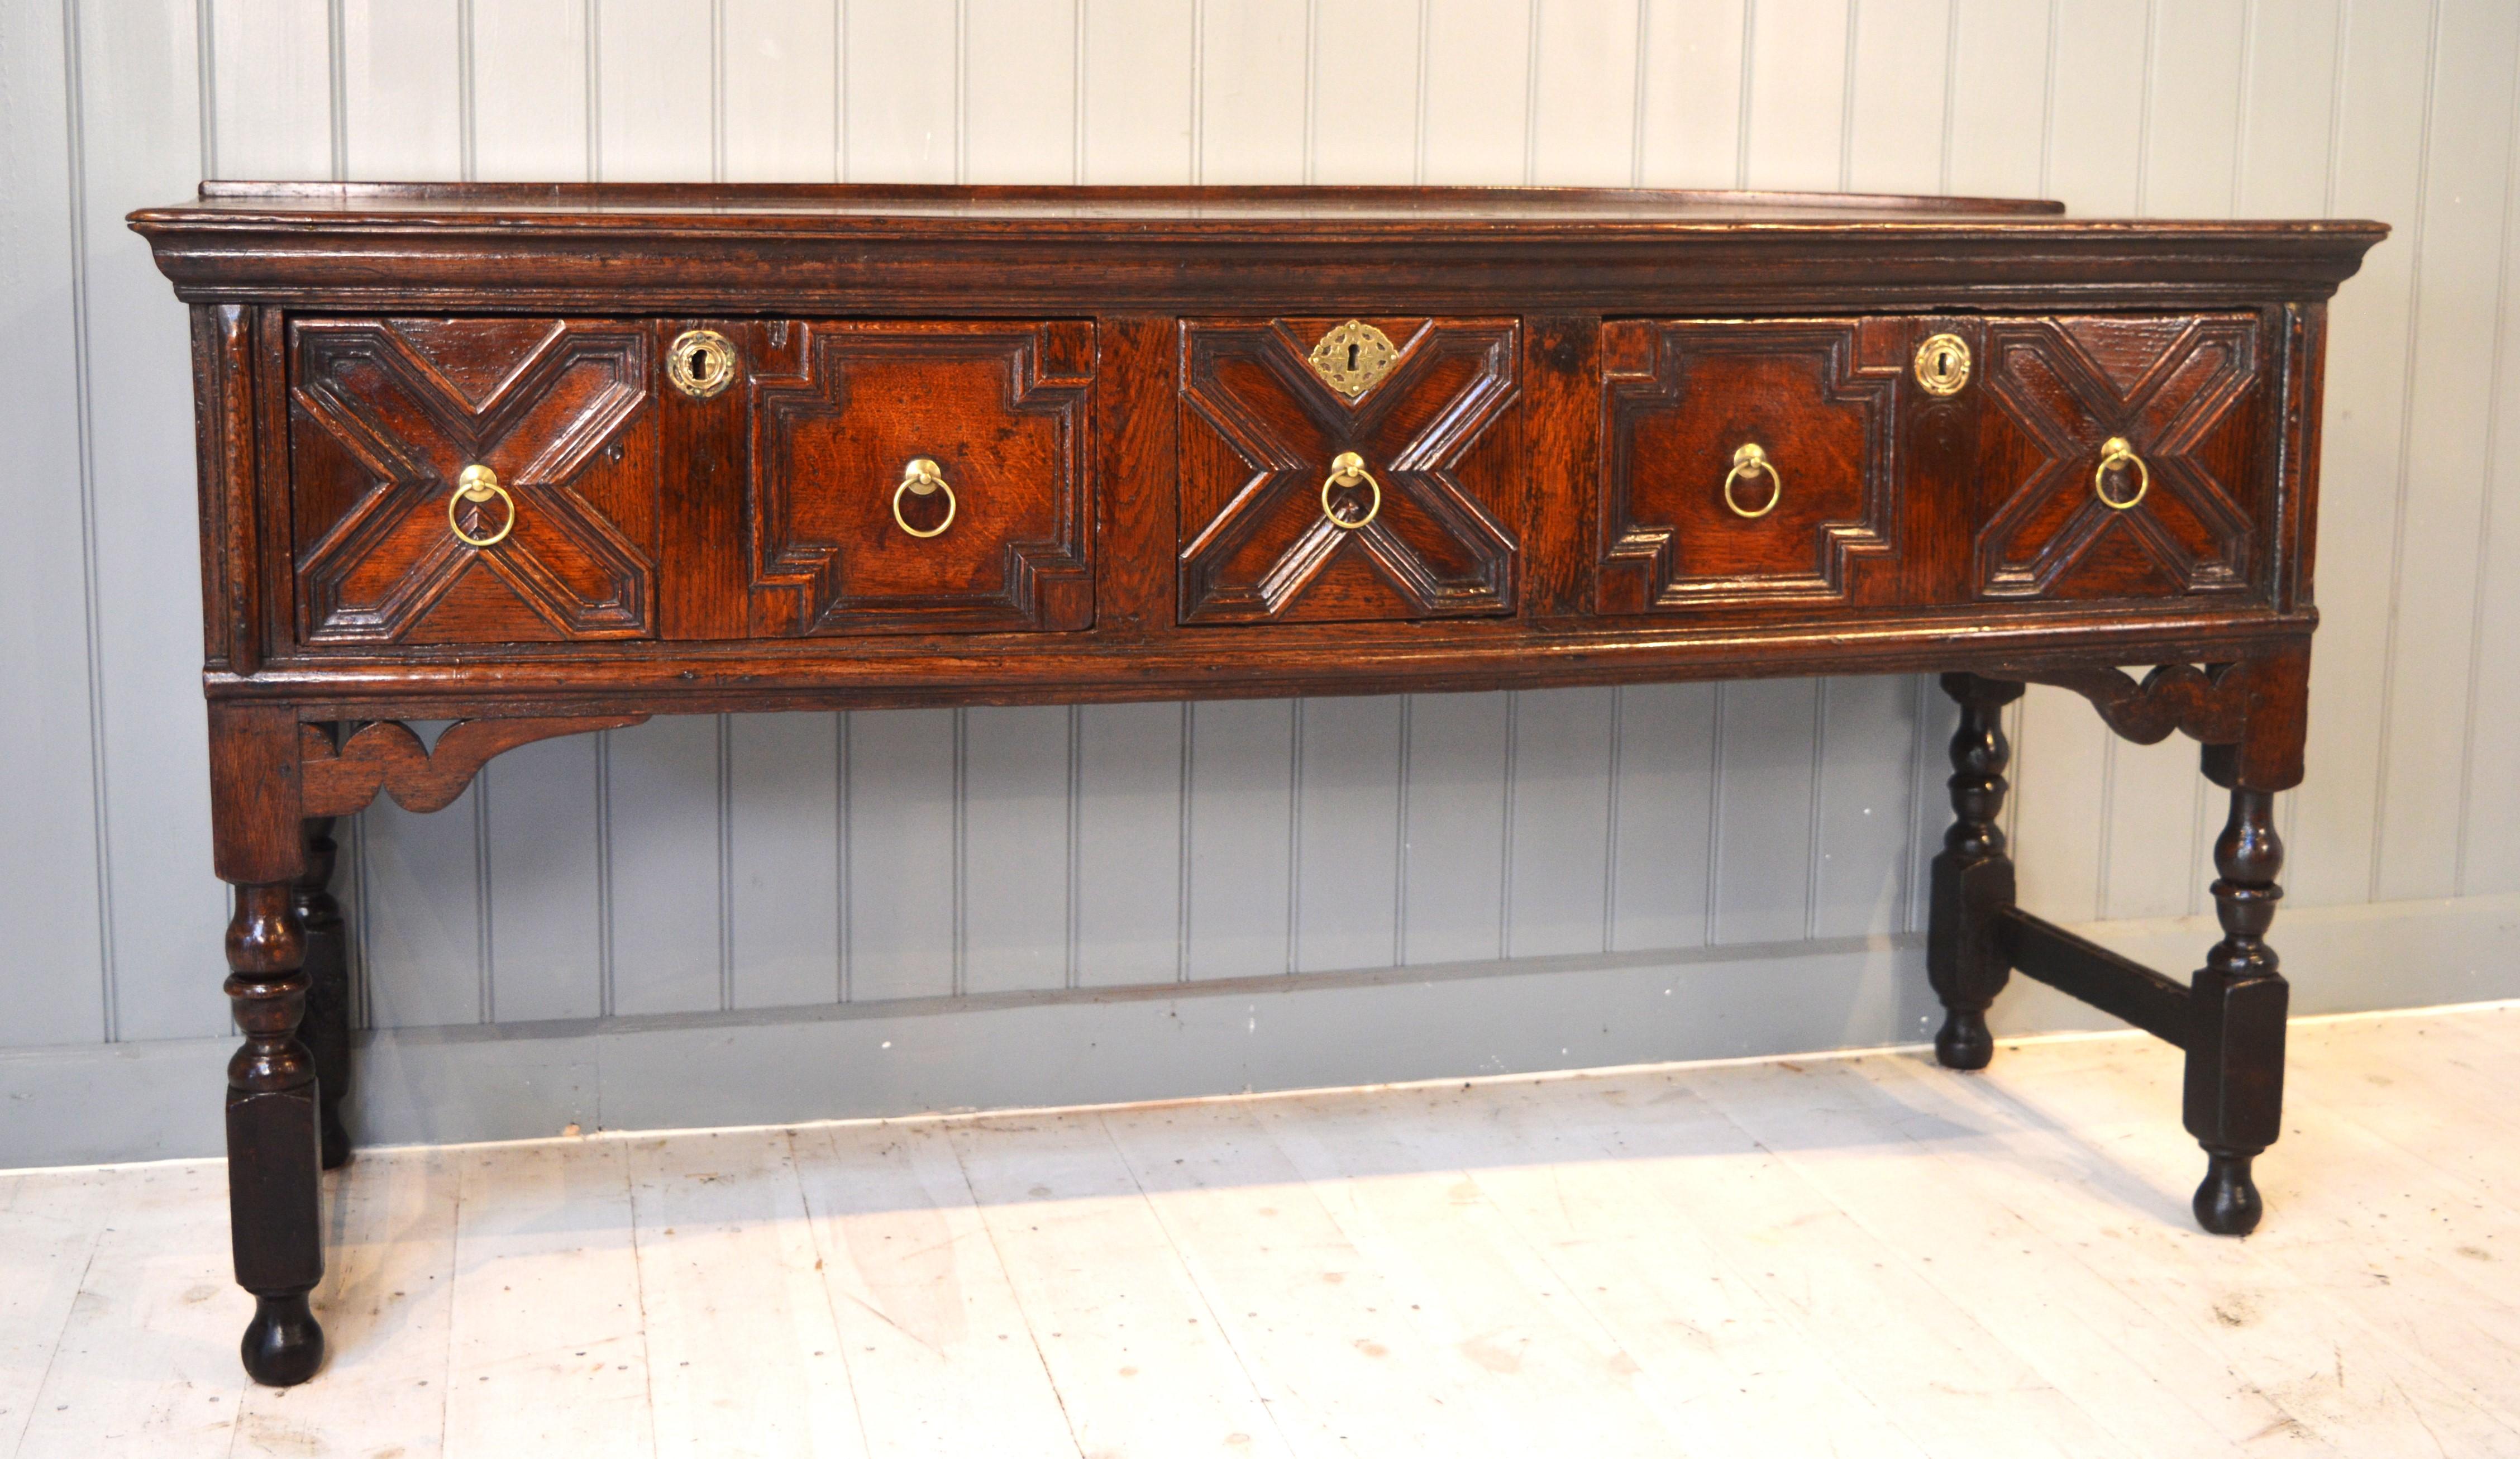 Charming late 17th century oak low dresser of small proportions. The beautifully patinated
top has a plate rail at the back.
The drawers are geometrically moulded with the usual early form of construction, the linings being nailed and the drawers